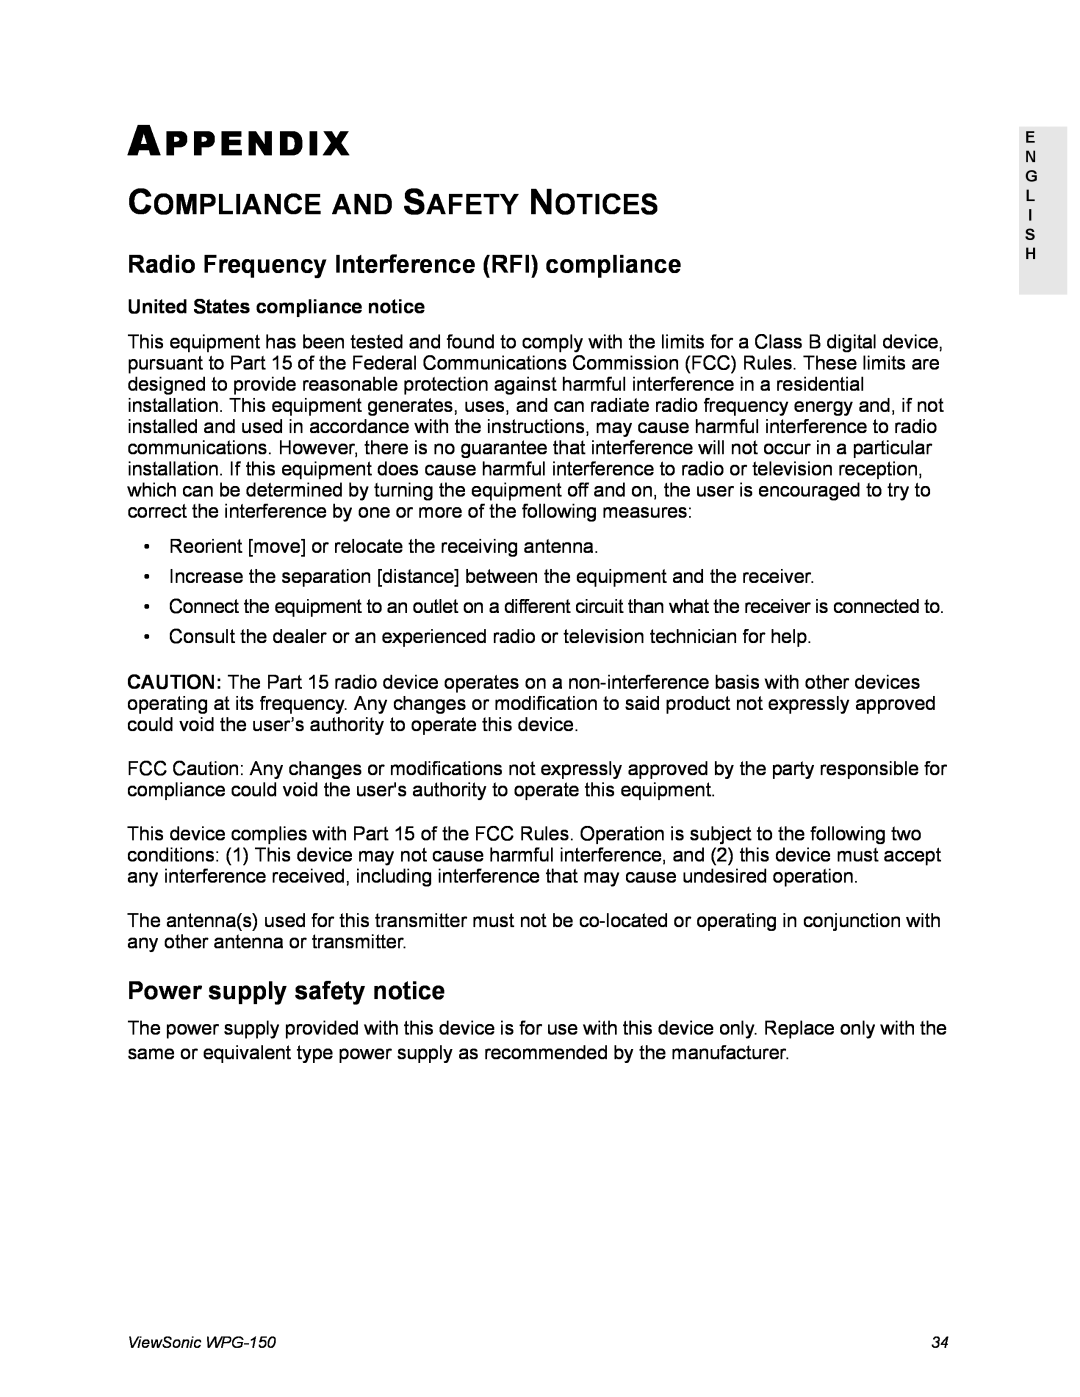 ViewSonic WPG-150 manual A Ppendix, Compliance And Safety Notices, Radio Frequency Interference RFI compliance 